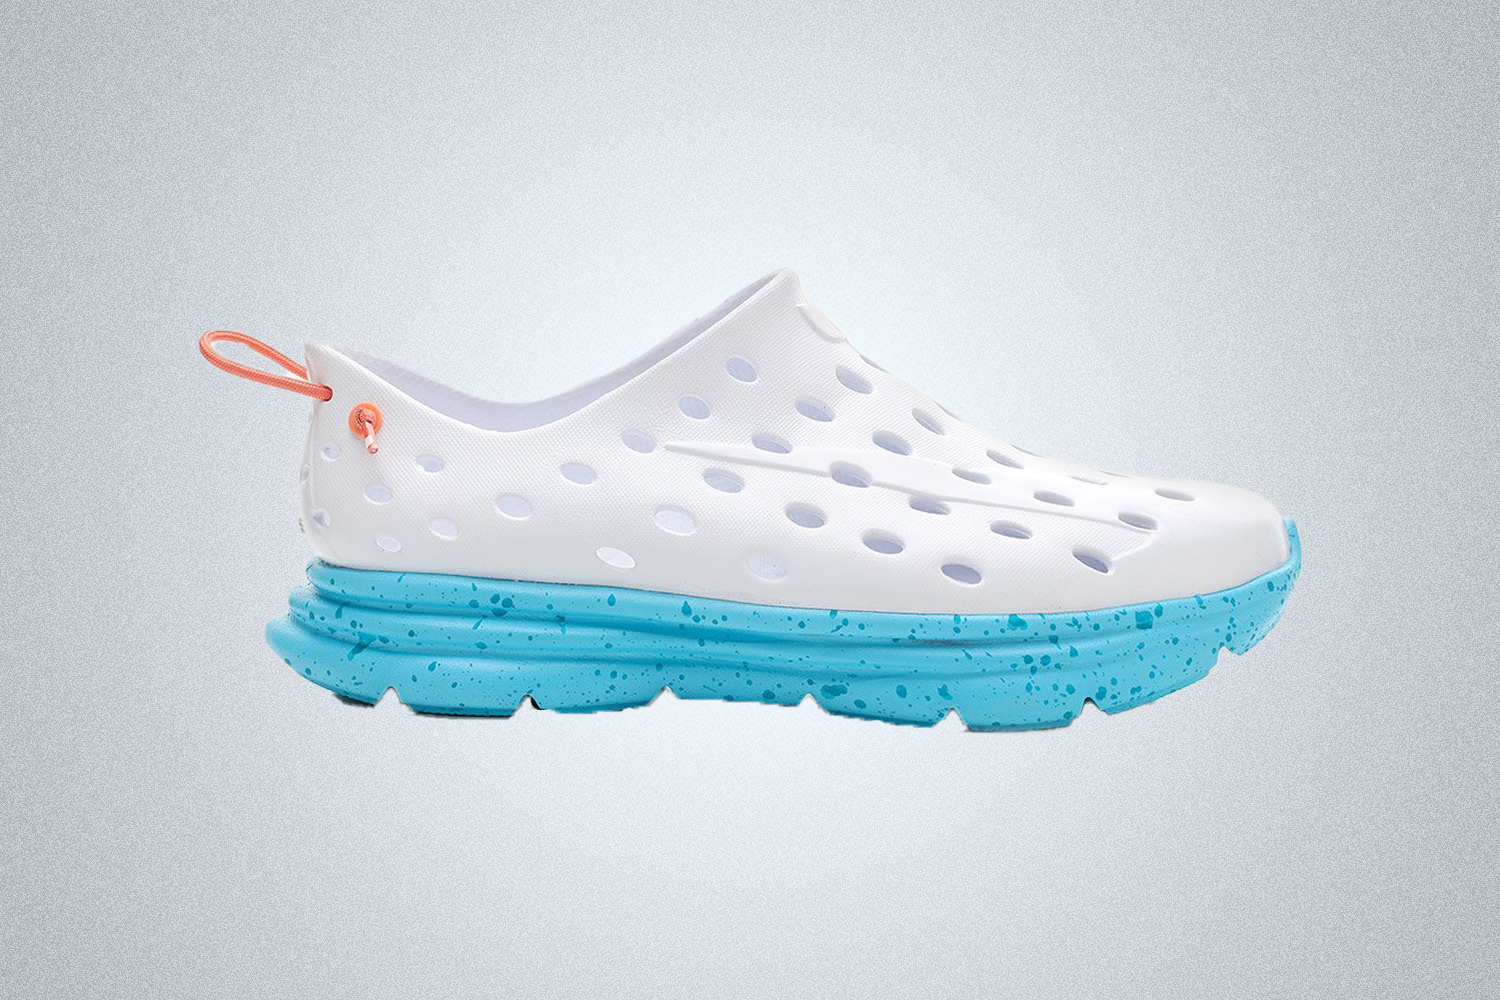 The Kane Revive Recovery Shoe in white and blue is a lightweight recovery shoe to use after working out and running